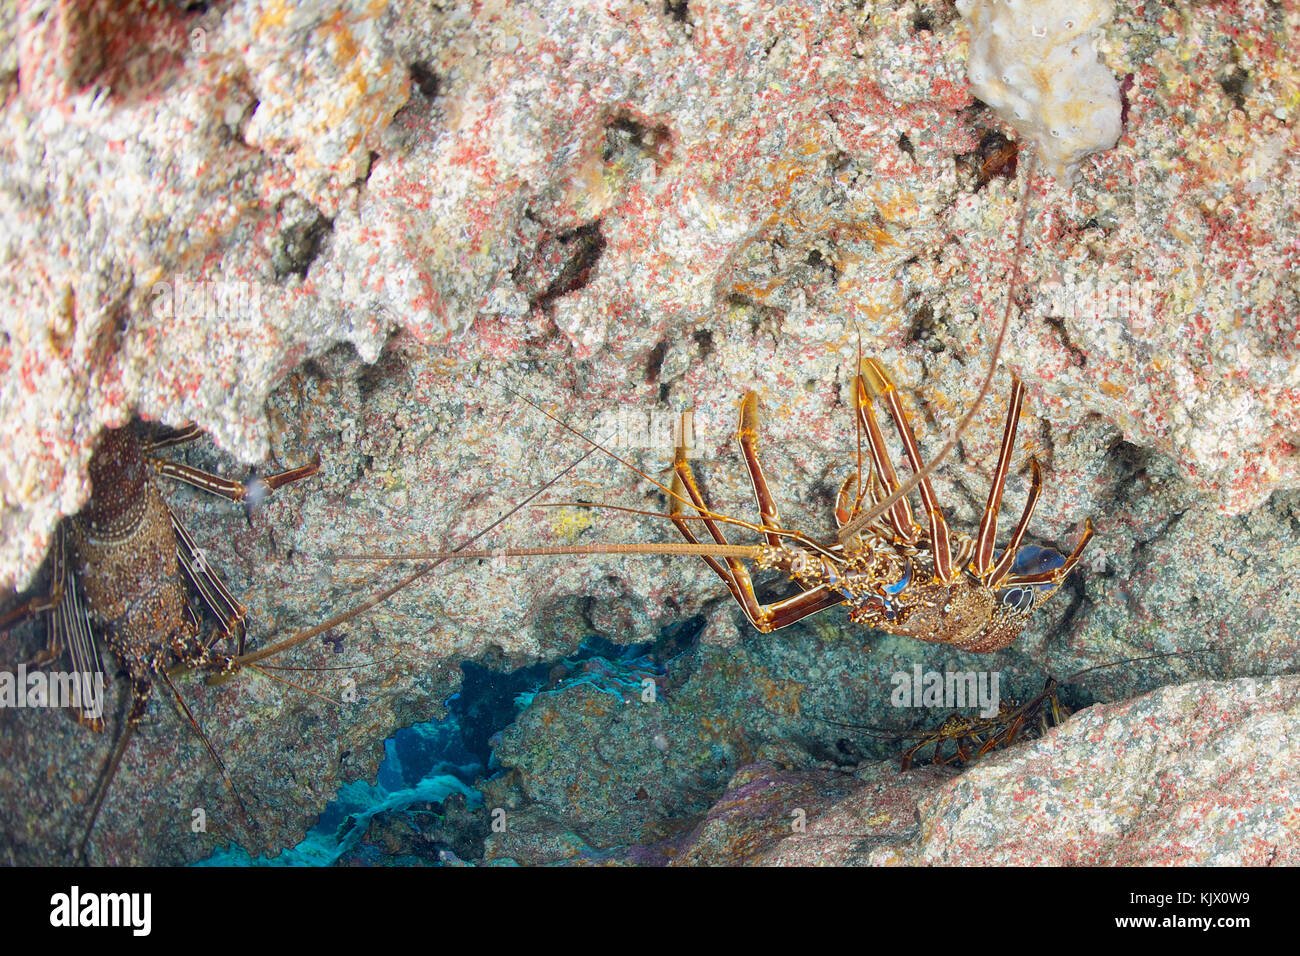 European Spiny lobsters hang upside down on the underside of a rocky reef in El Hierro, Canary Islands. Stock Photo